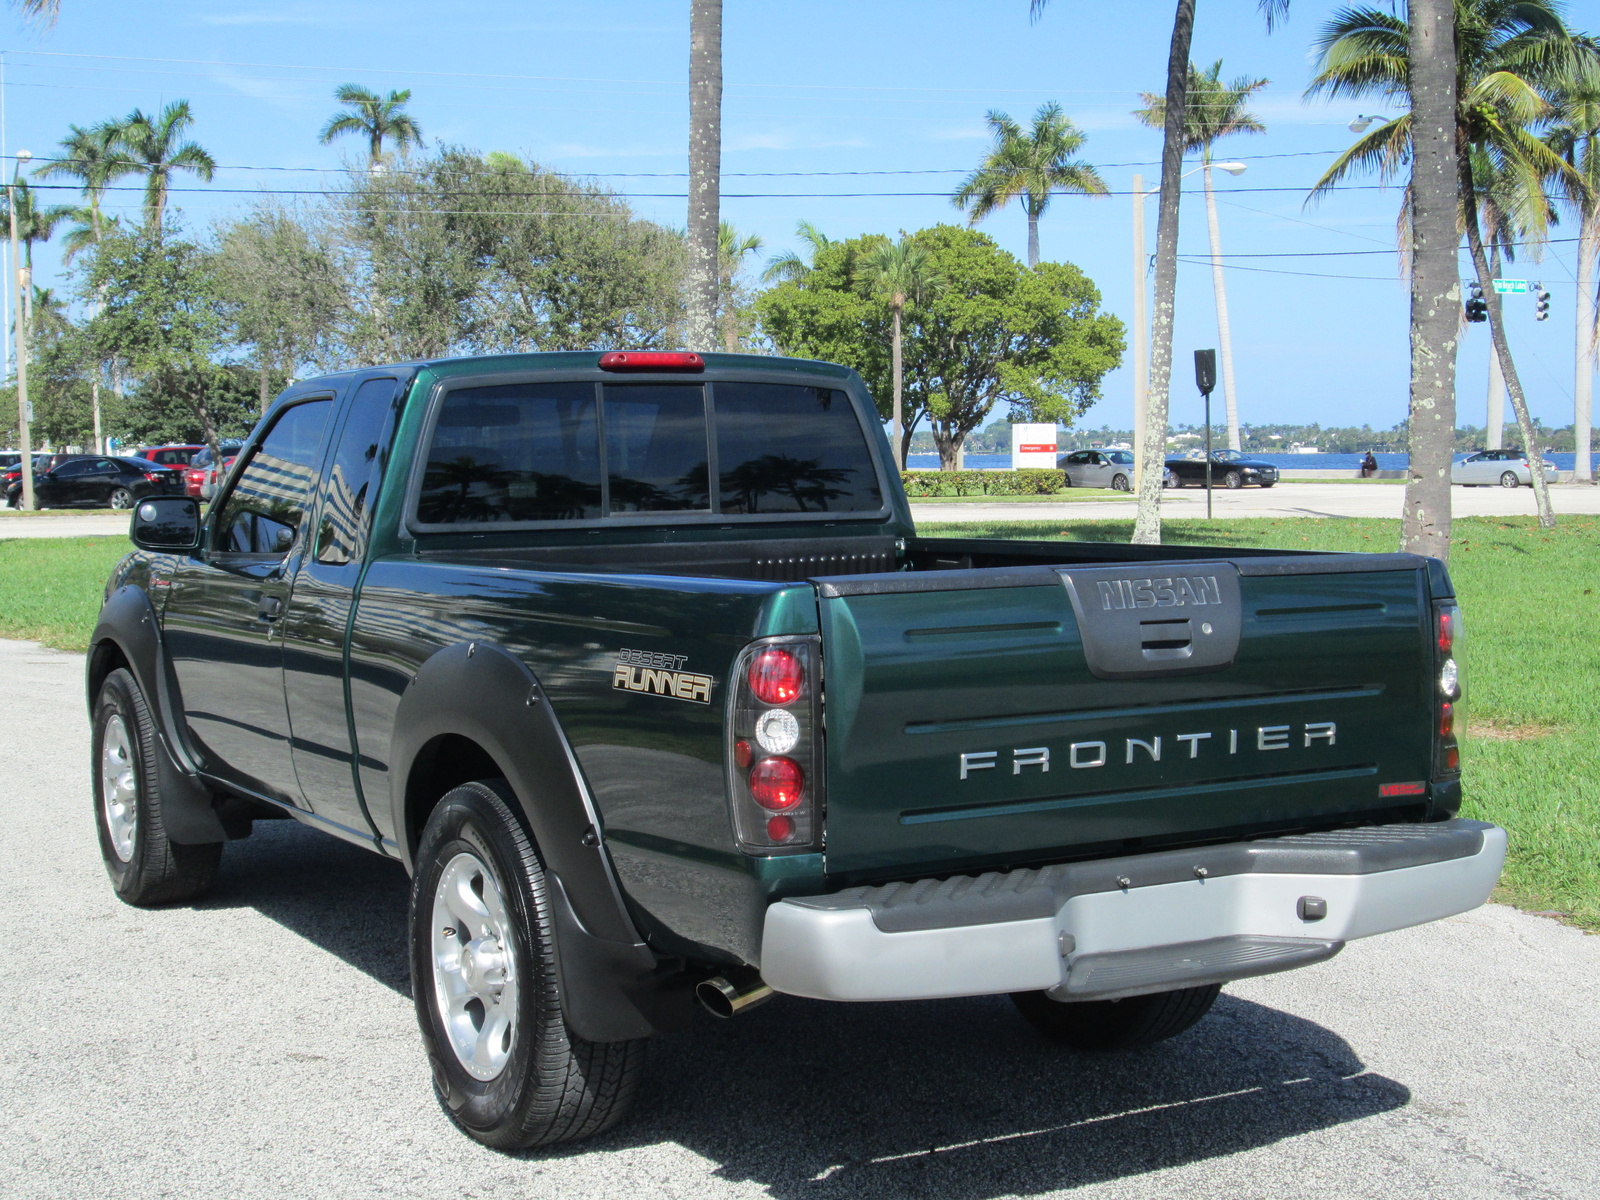 2001 Nissan frontier supercharged specs #2